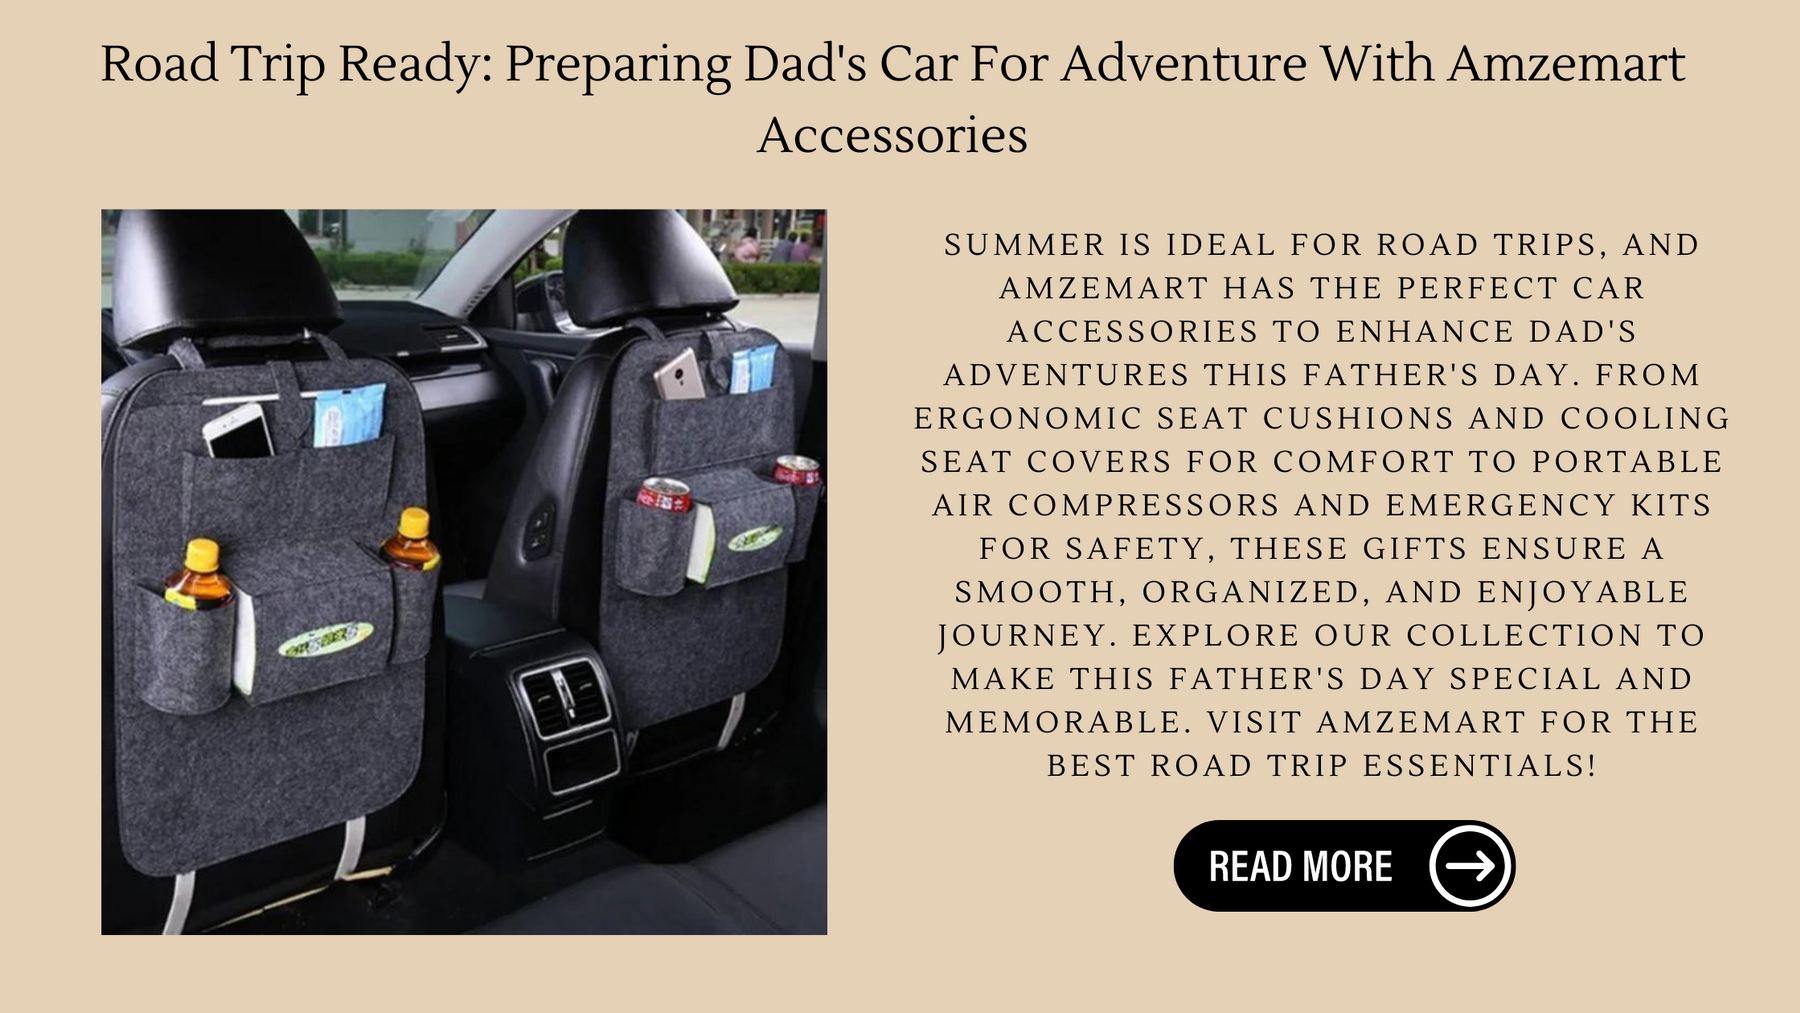 Road Trip Ready: Preparing Dad's Car For Adventure With Amzemart Accessories